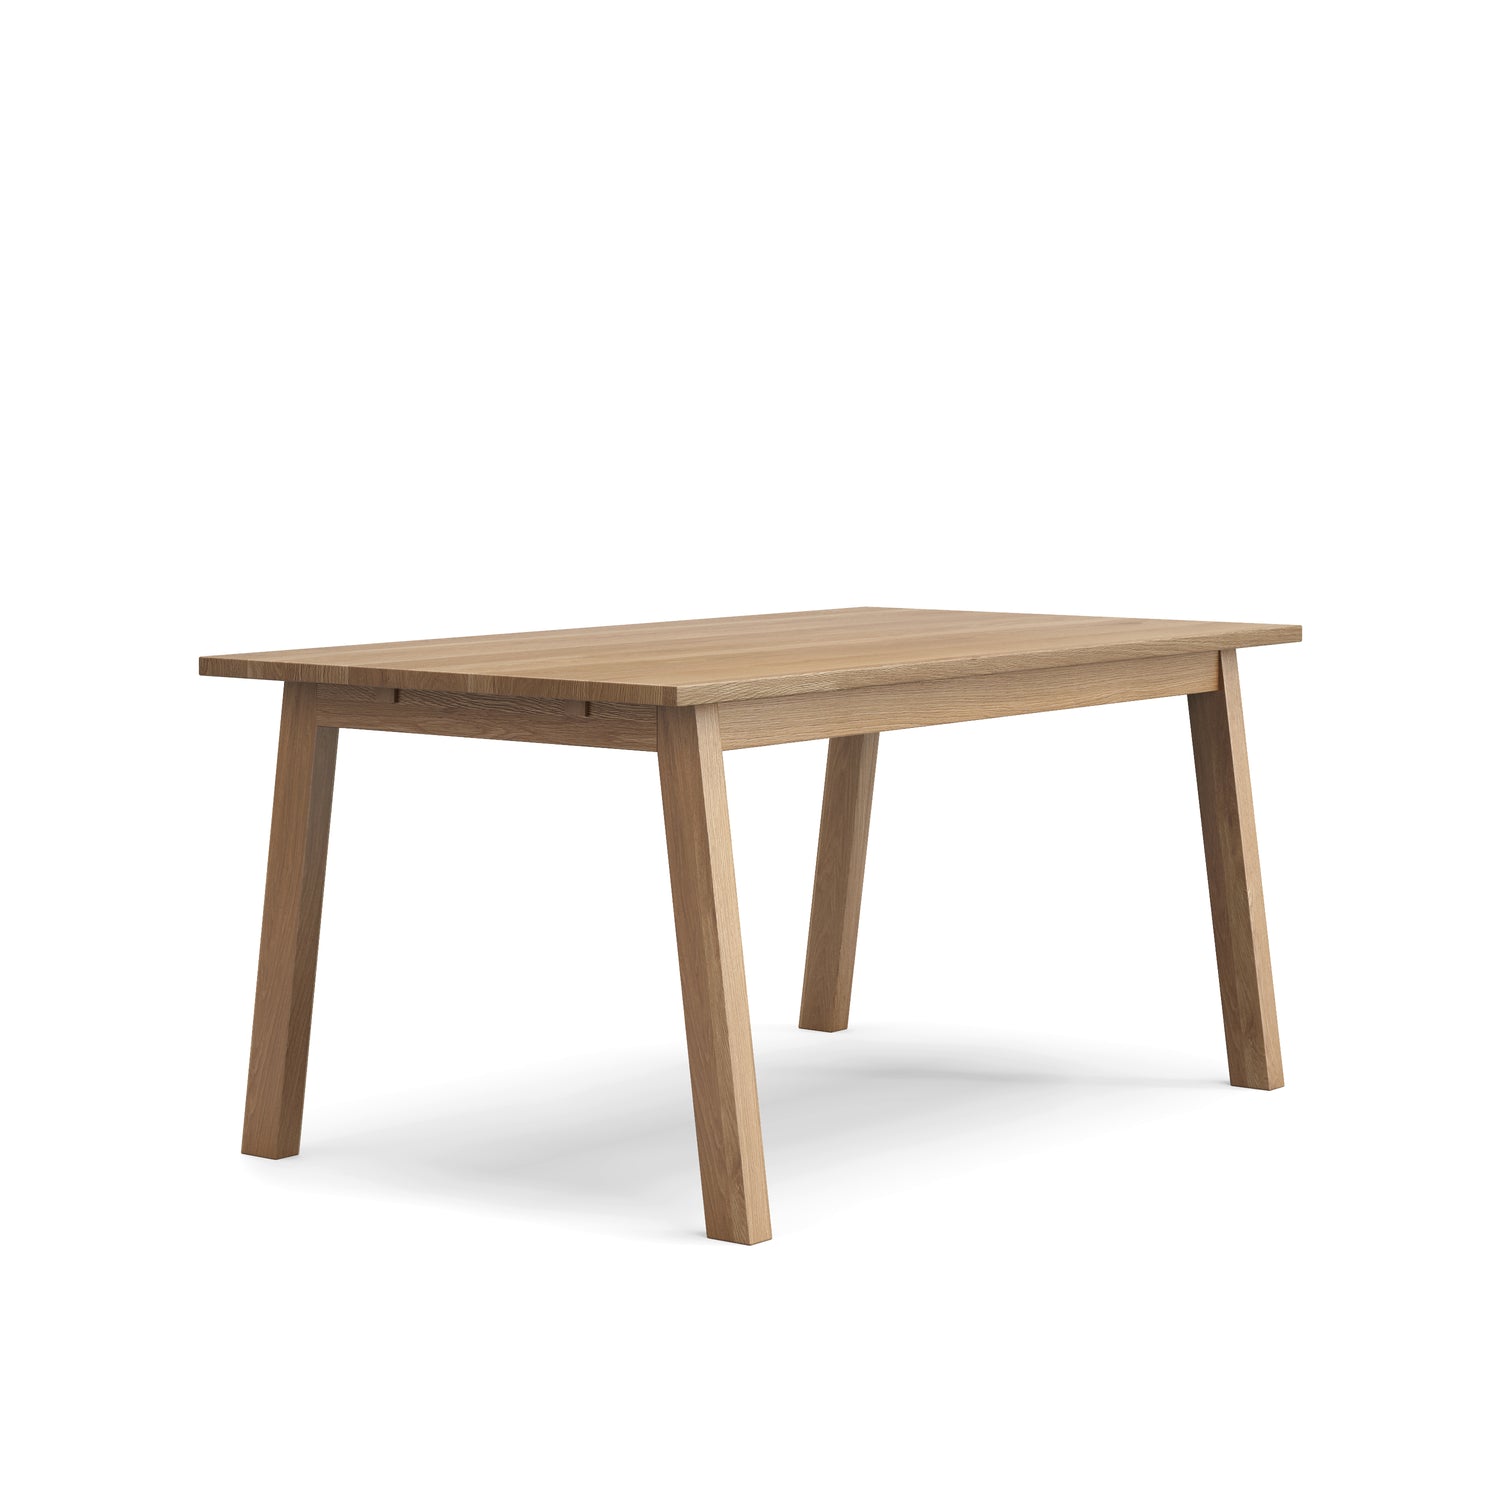 Luft solid wood dinning table